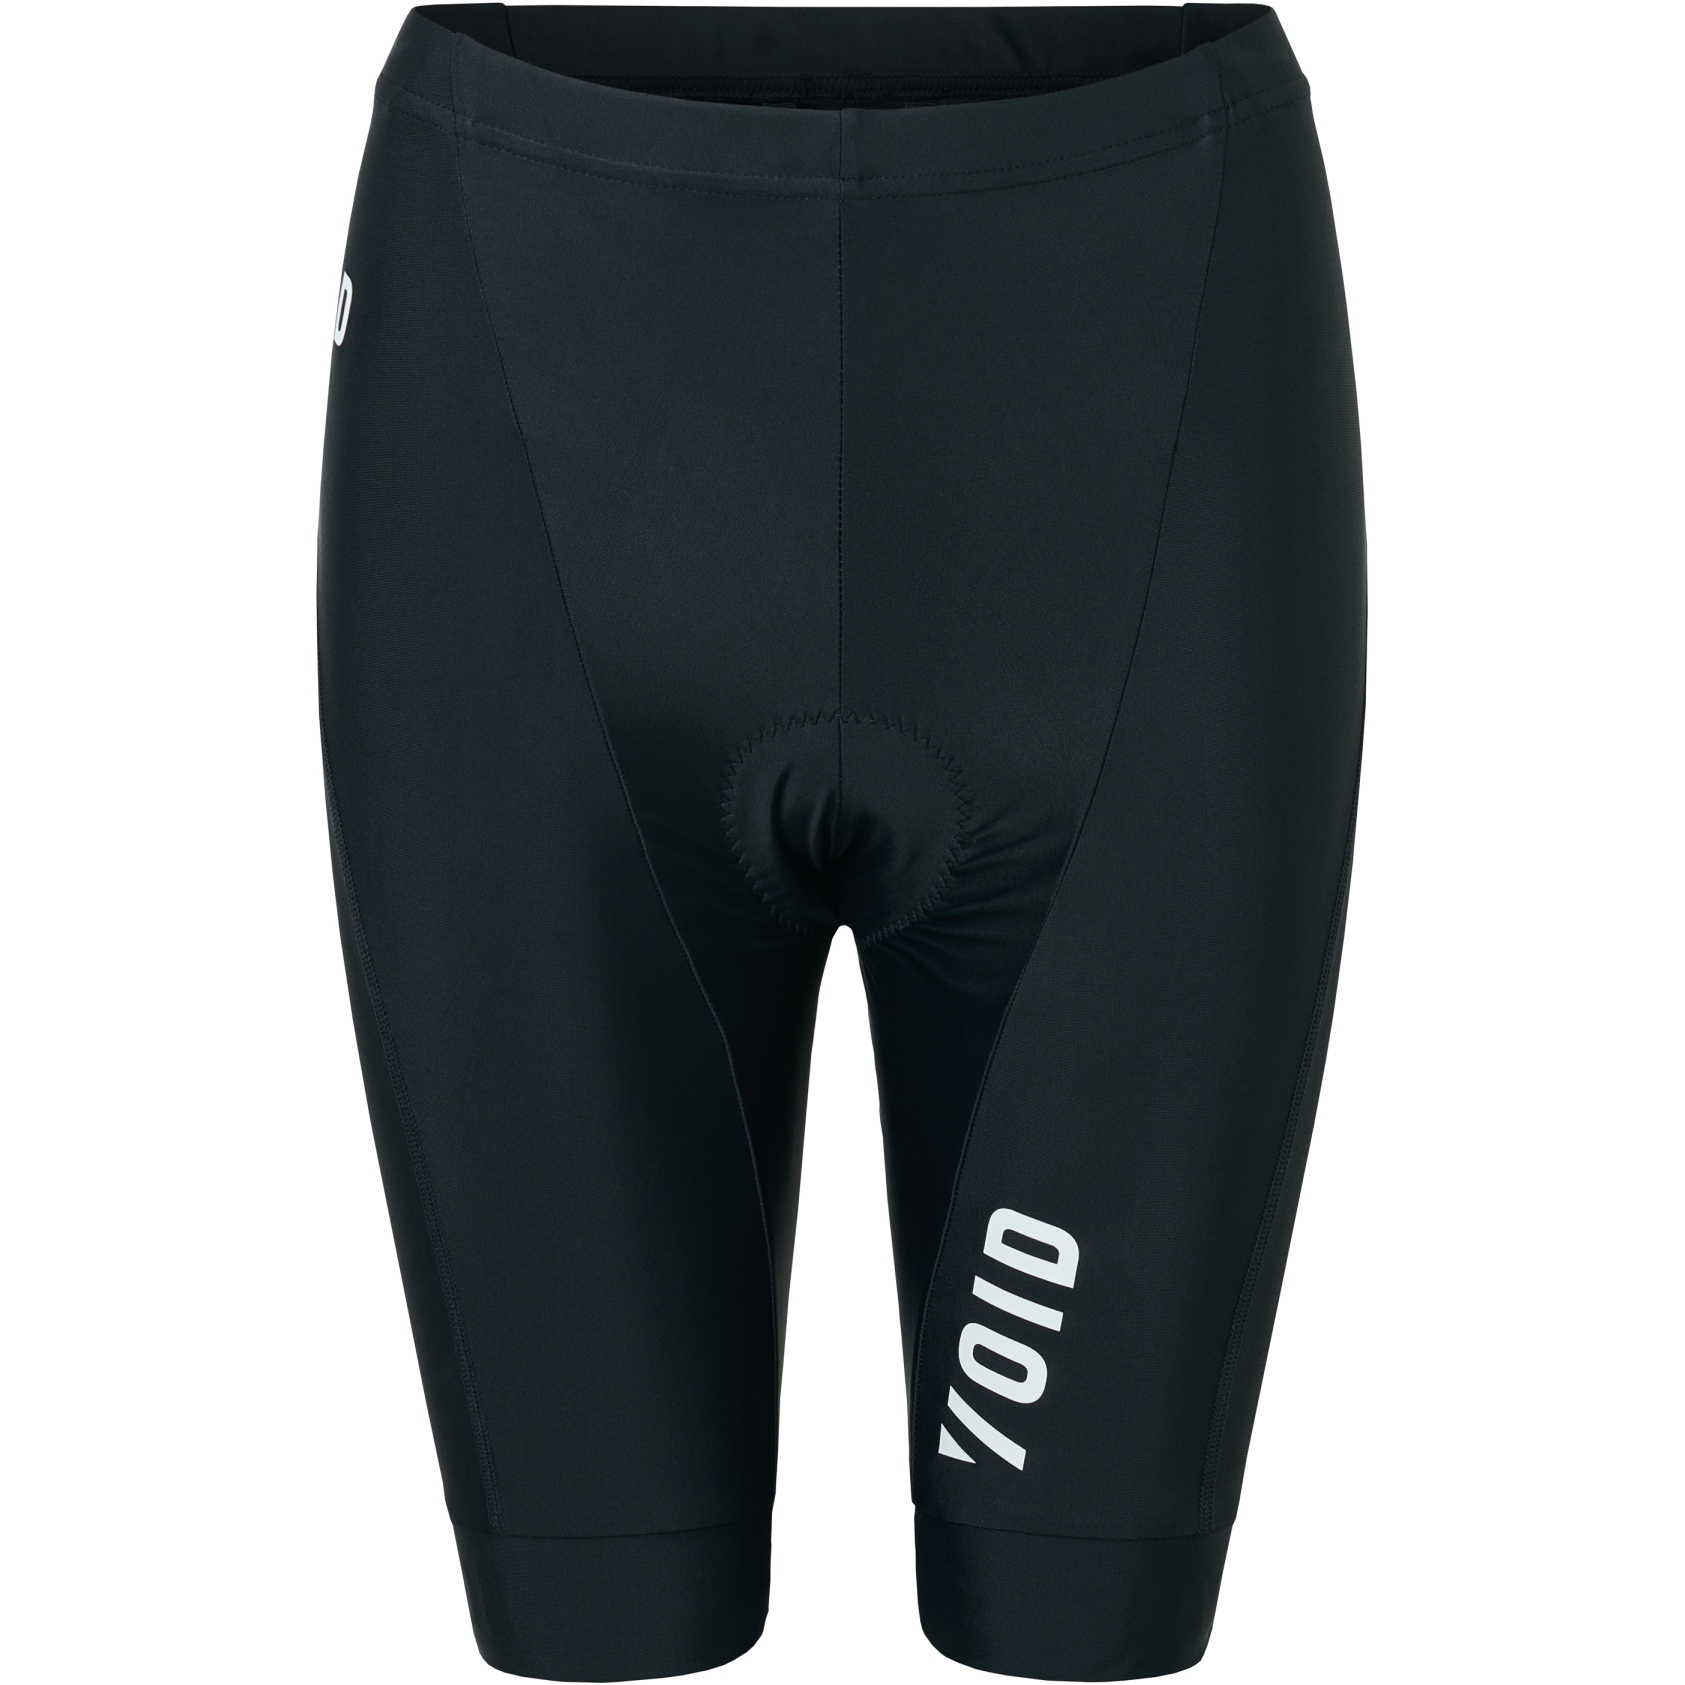 Productfoto van VOID Cycling Core Women&#039;s Cycle Shorts - Black